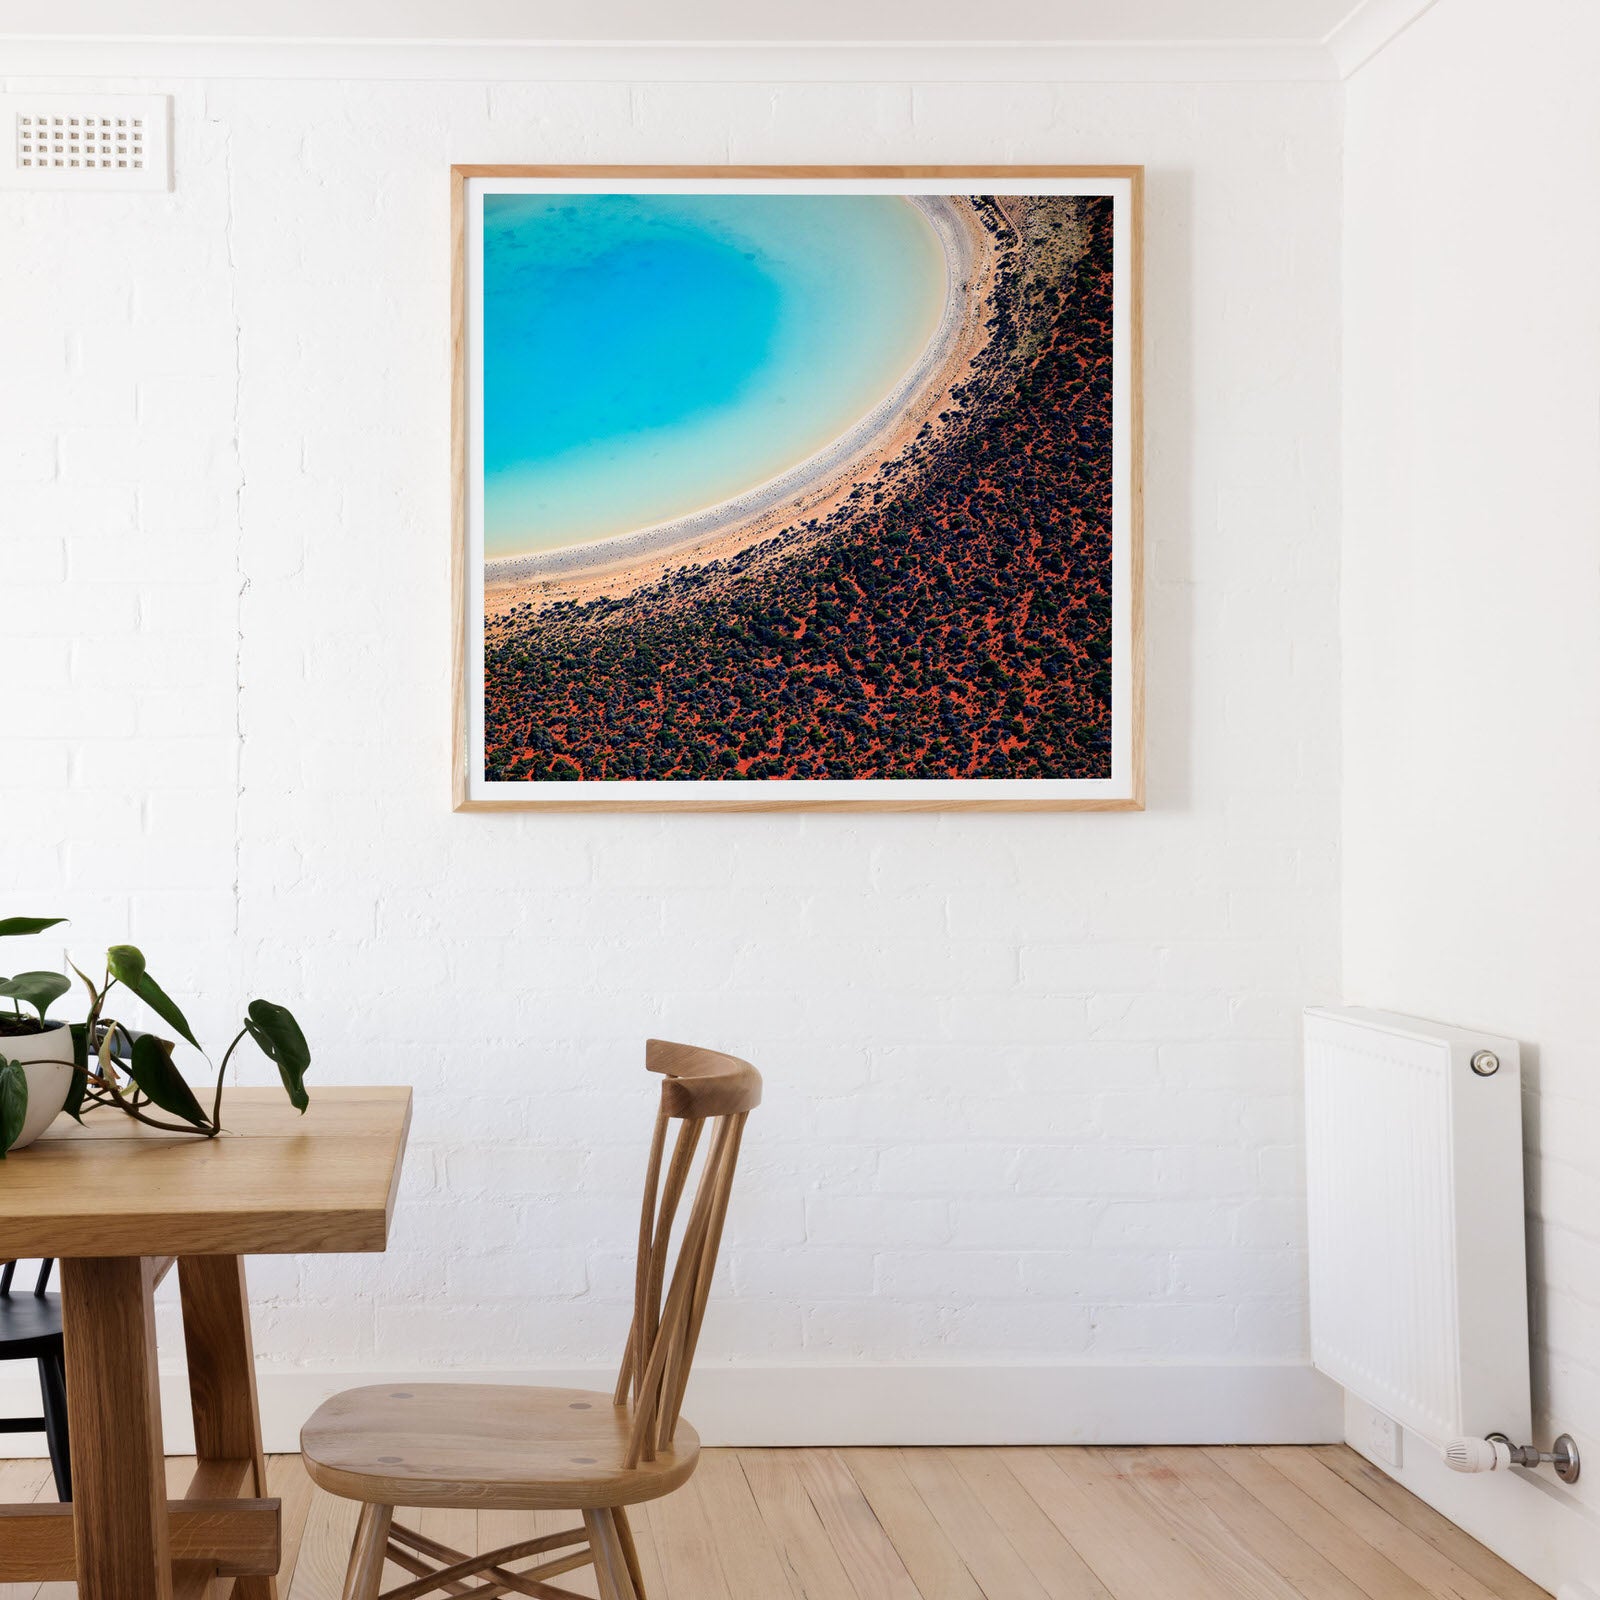 Tasmanian Oak Framed print on white wall with abstract print of red and blue sands